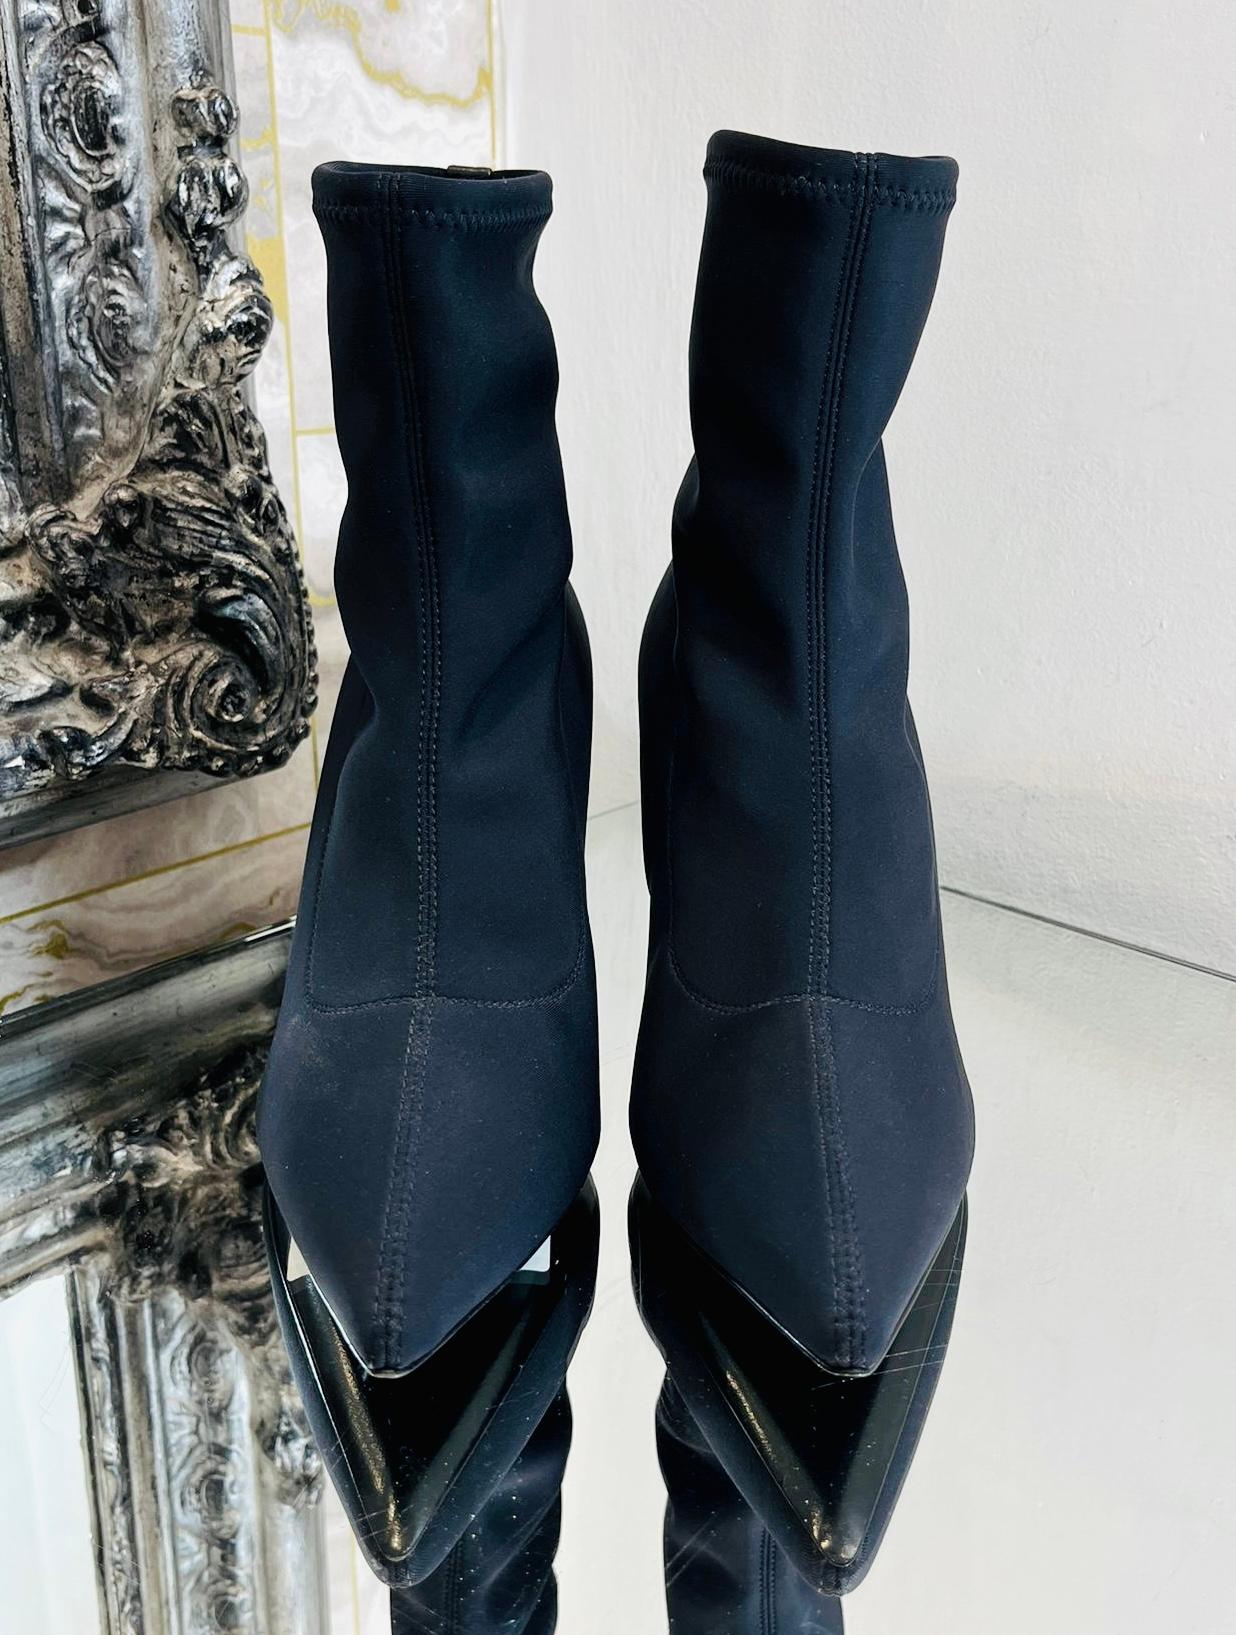 Giuseppe Zanotti Mirea Nylon Ankle Boots

Black pull-on boots designed with stretch fabric and sock-style ankle.

Detailed with pointed toe, stiletto heel and silver logo stud top rear. Rrp £675

Size – 38

Condition – Very Good (Light